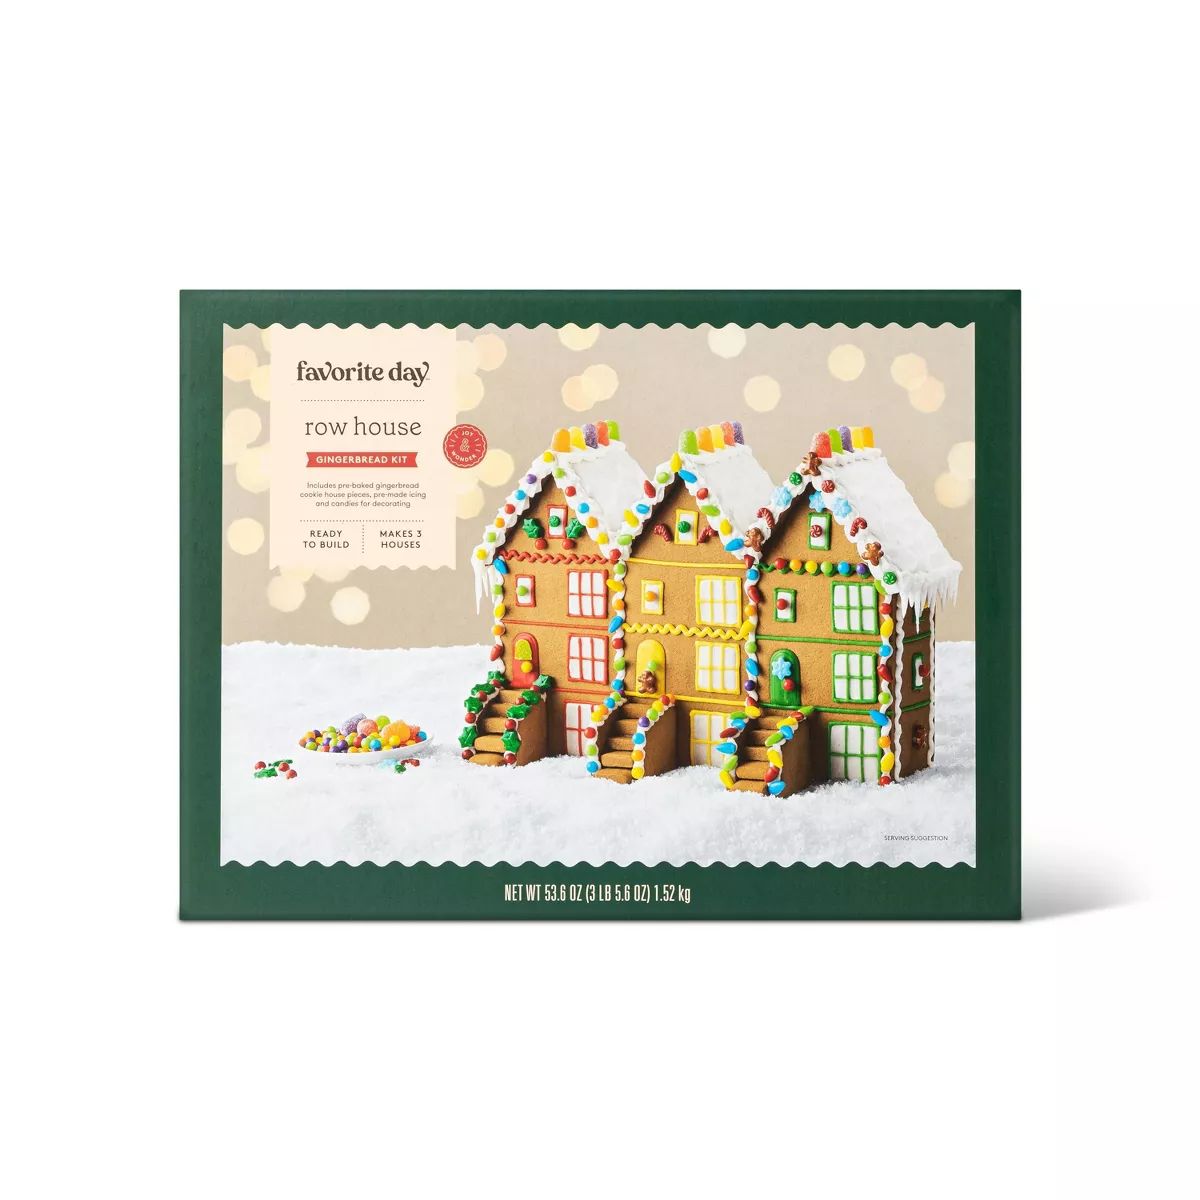 Holiday Row House Gingerbread Kit - 51.54oz - Favorite Day™ | Target